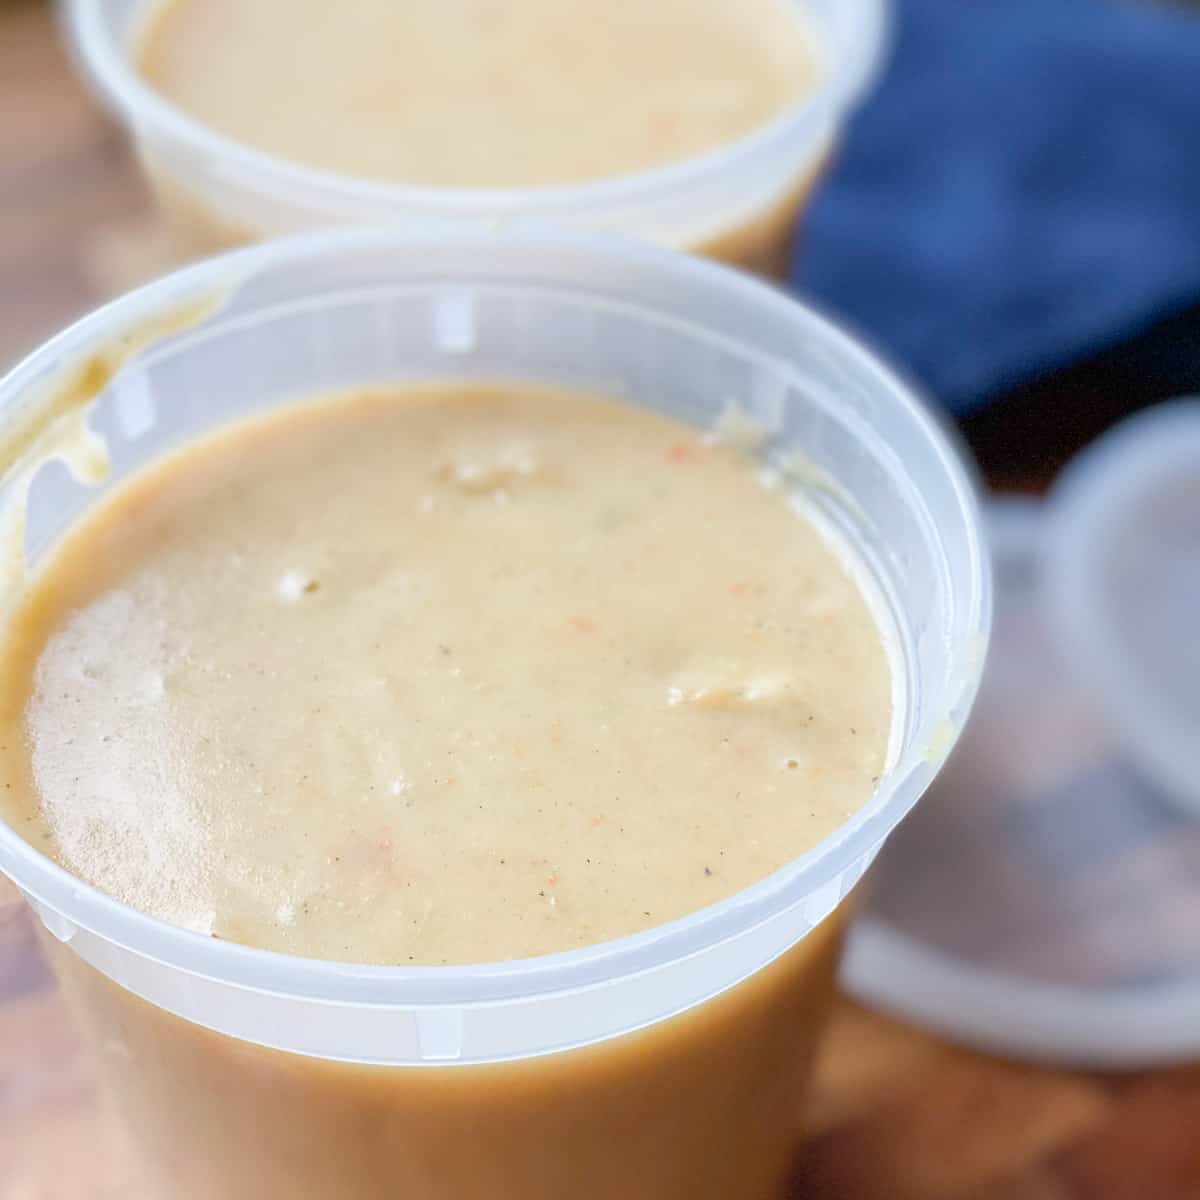 Image of potato soup in storage containers with lids and blue towel on right hand side.